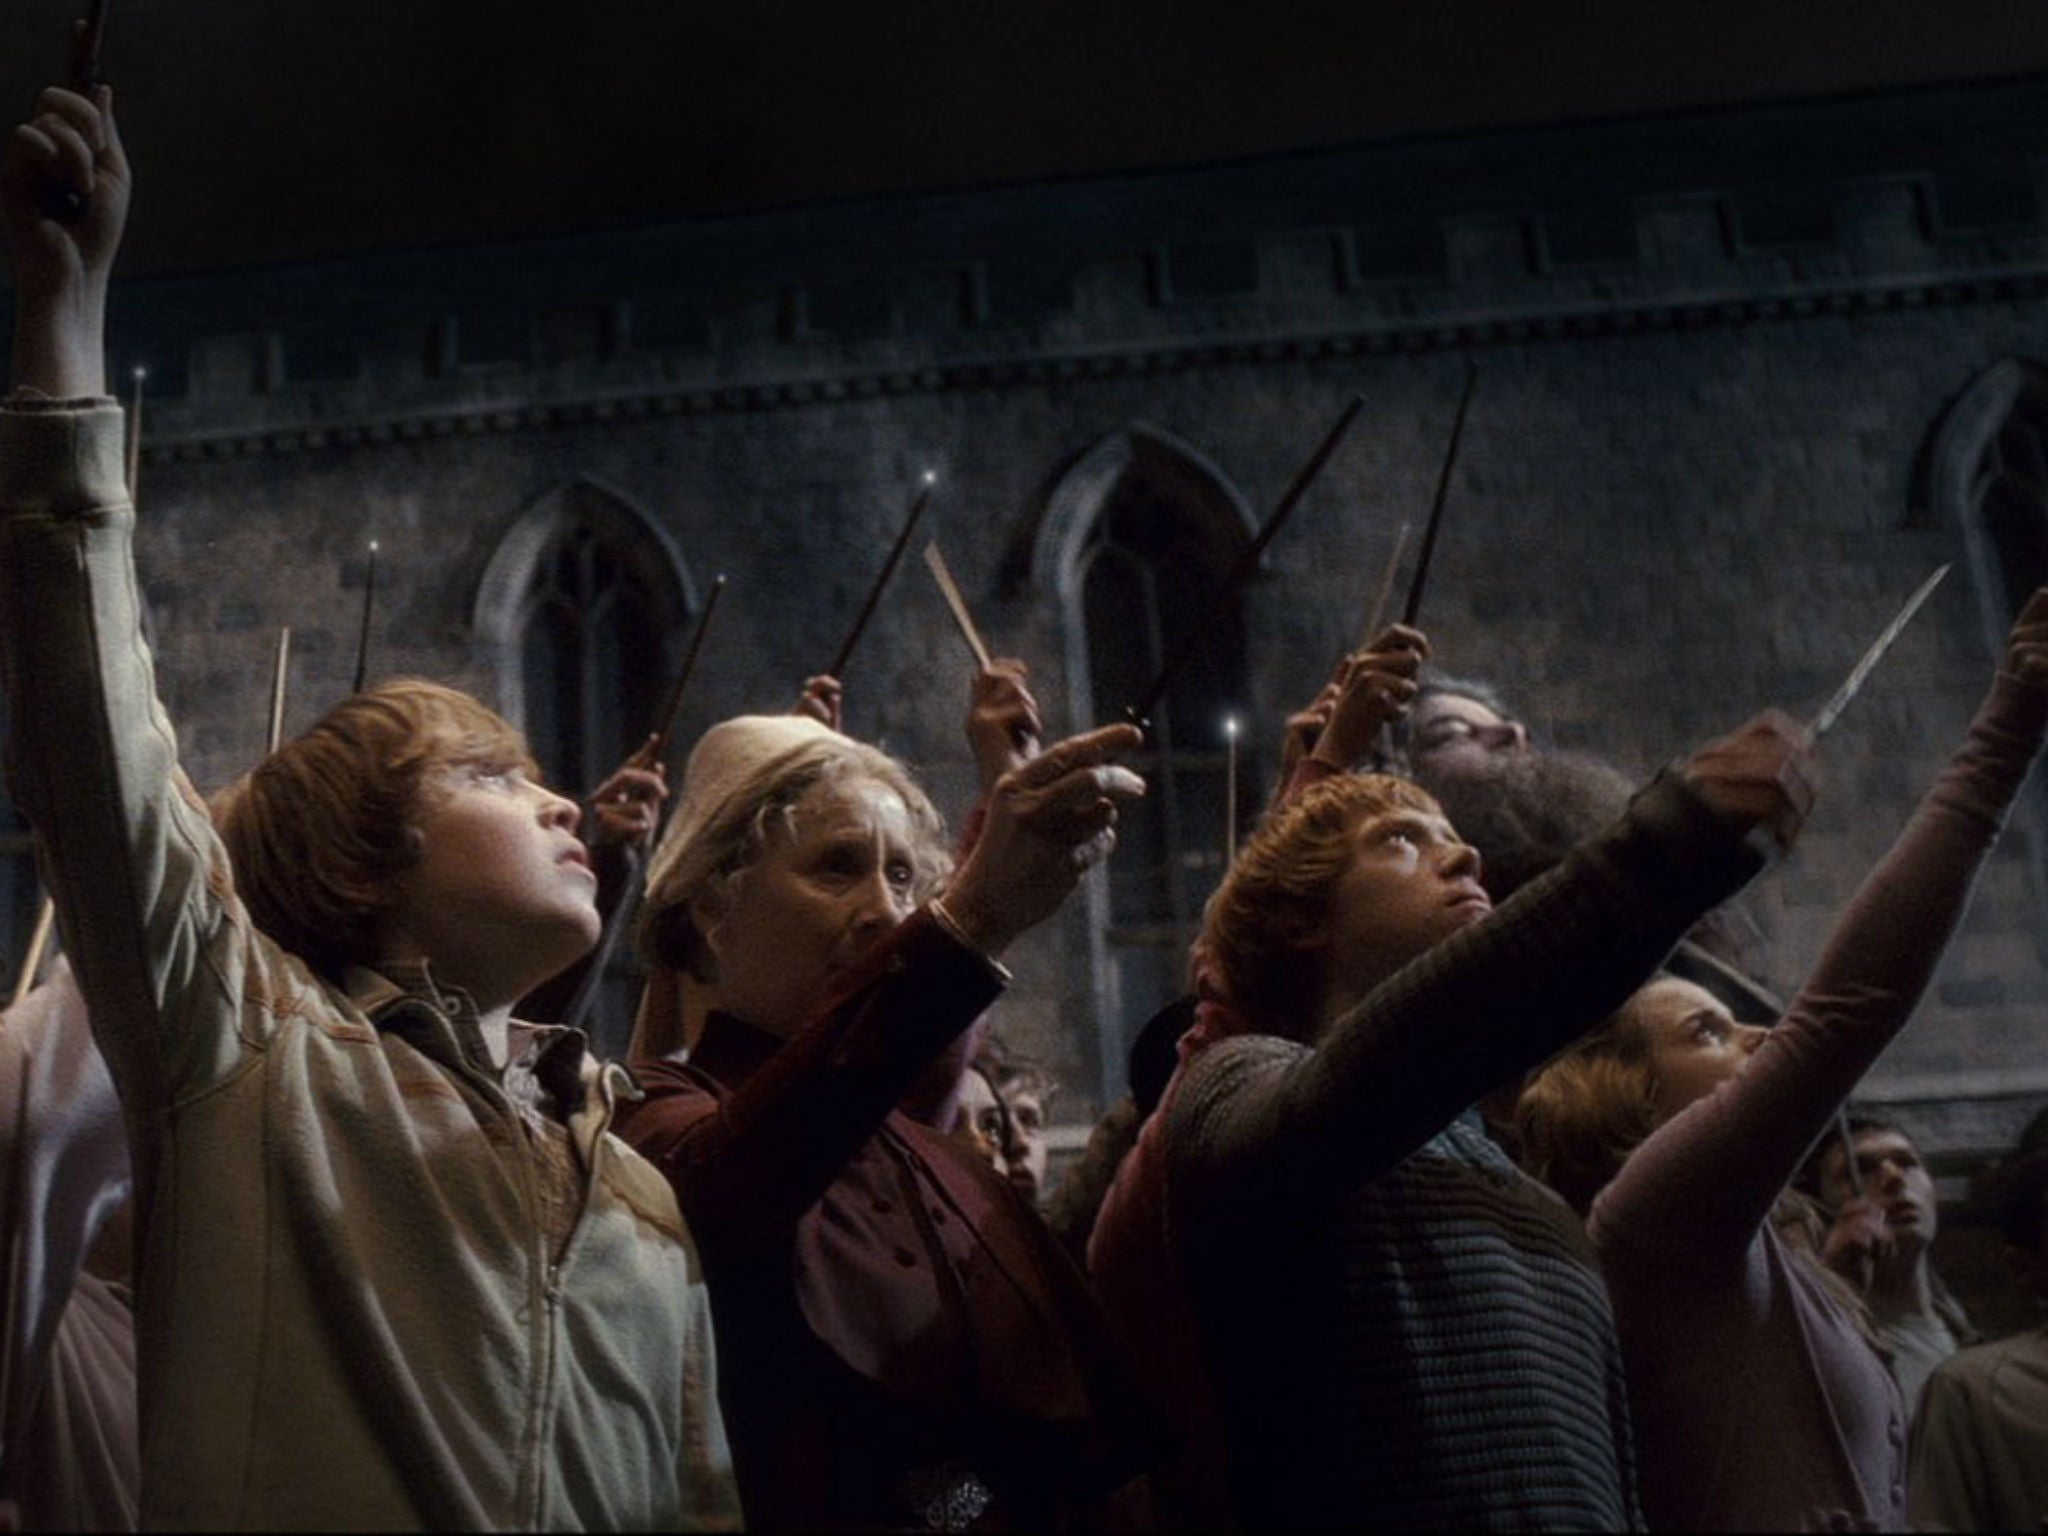 wands up